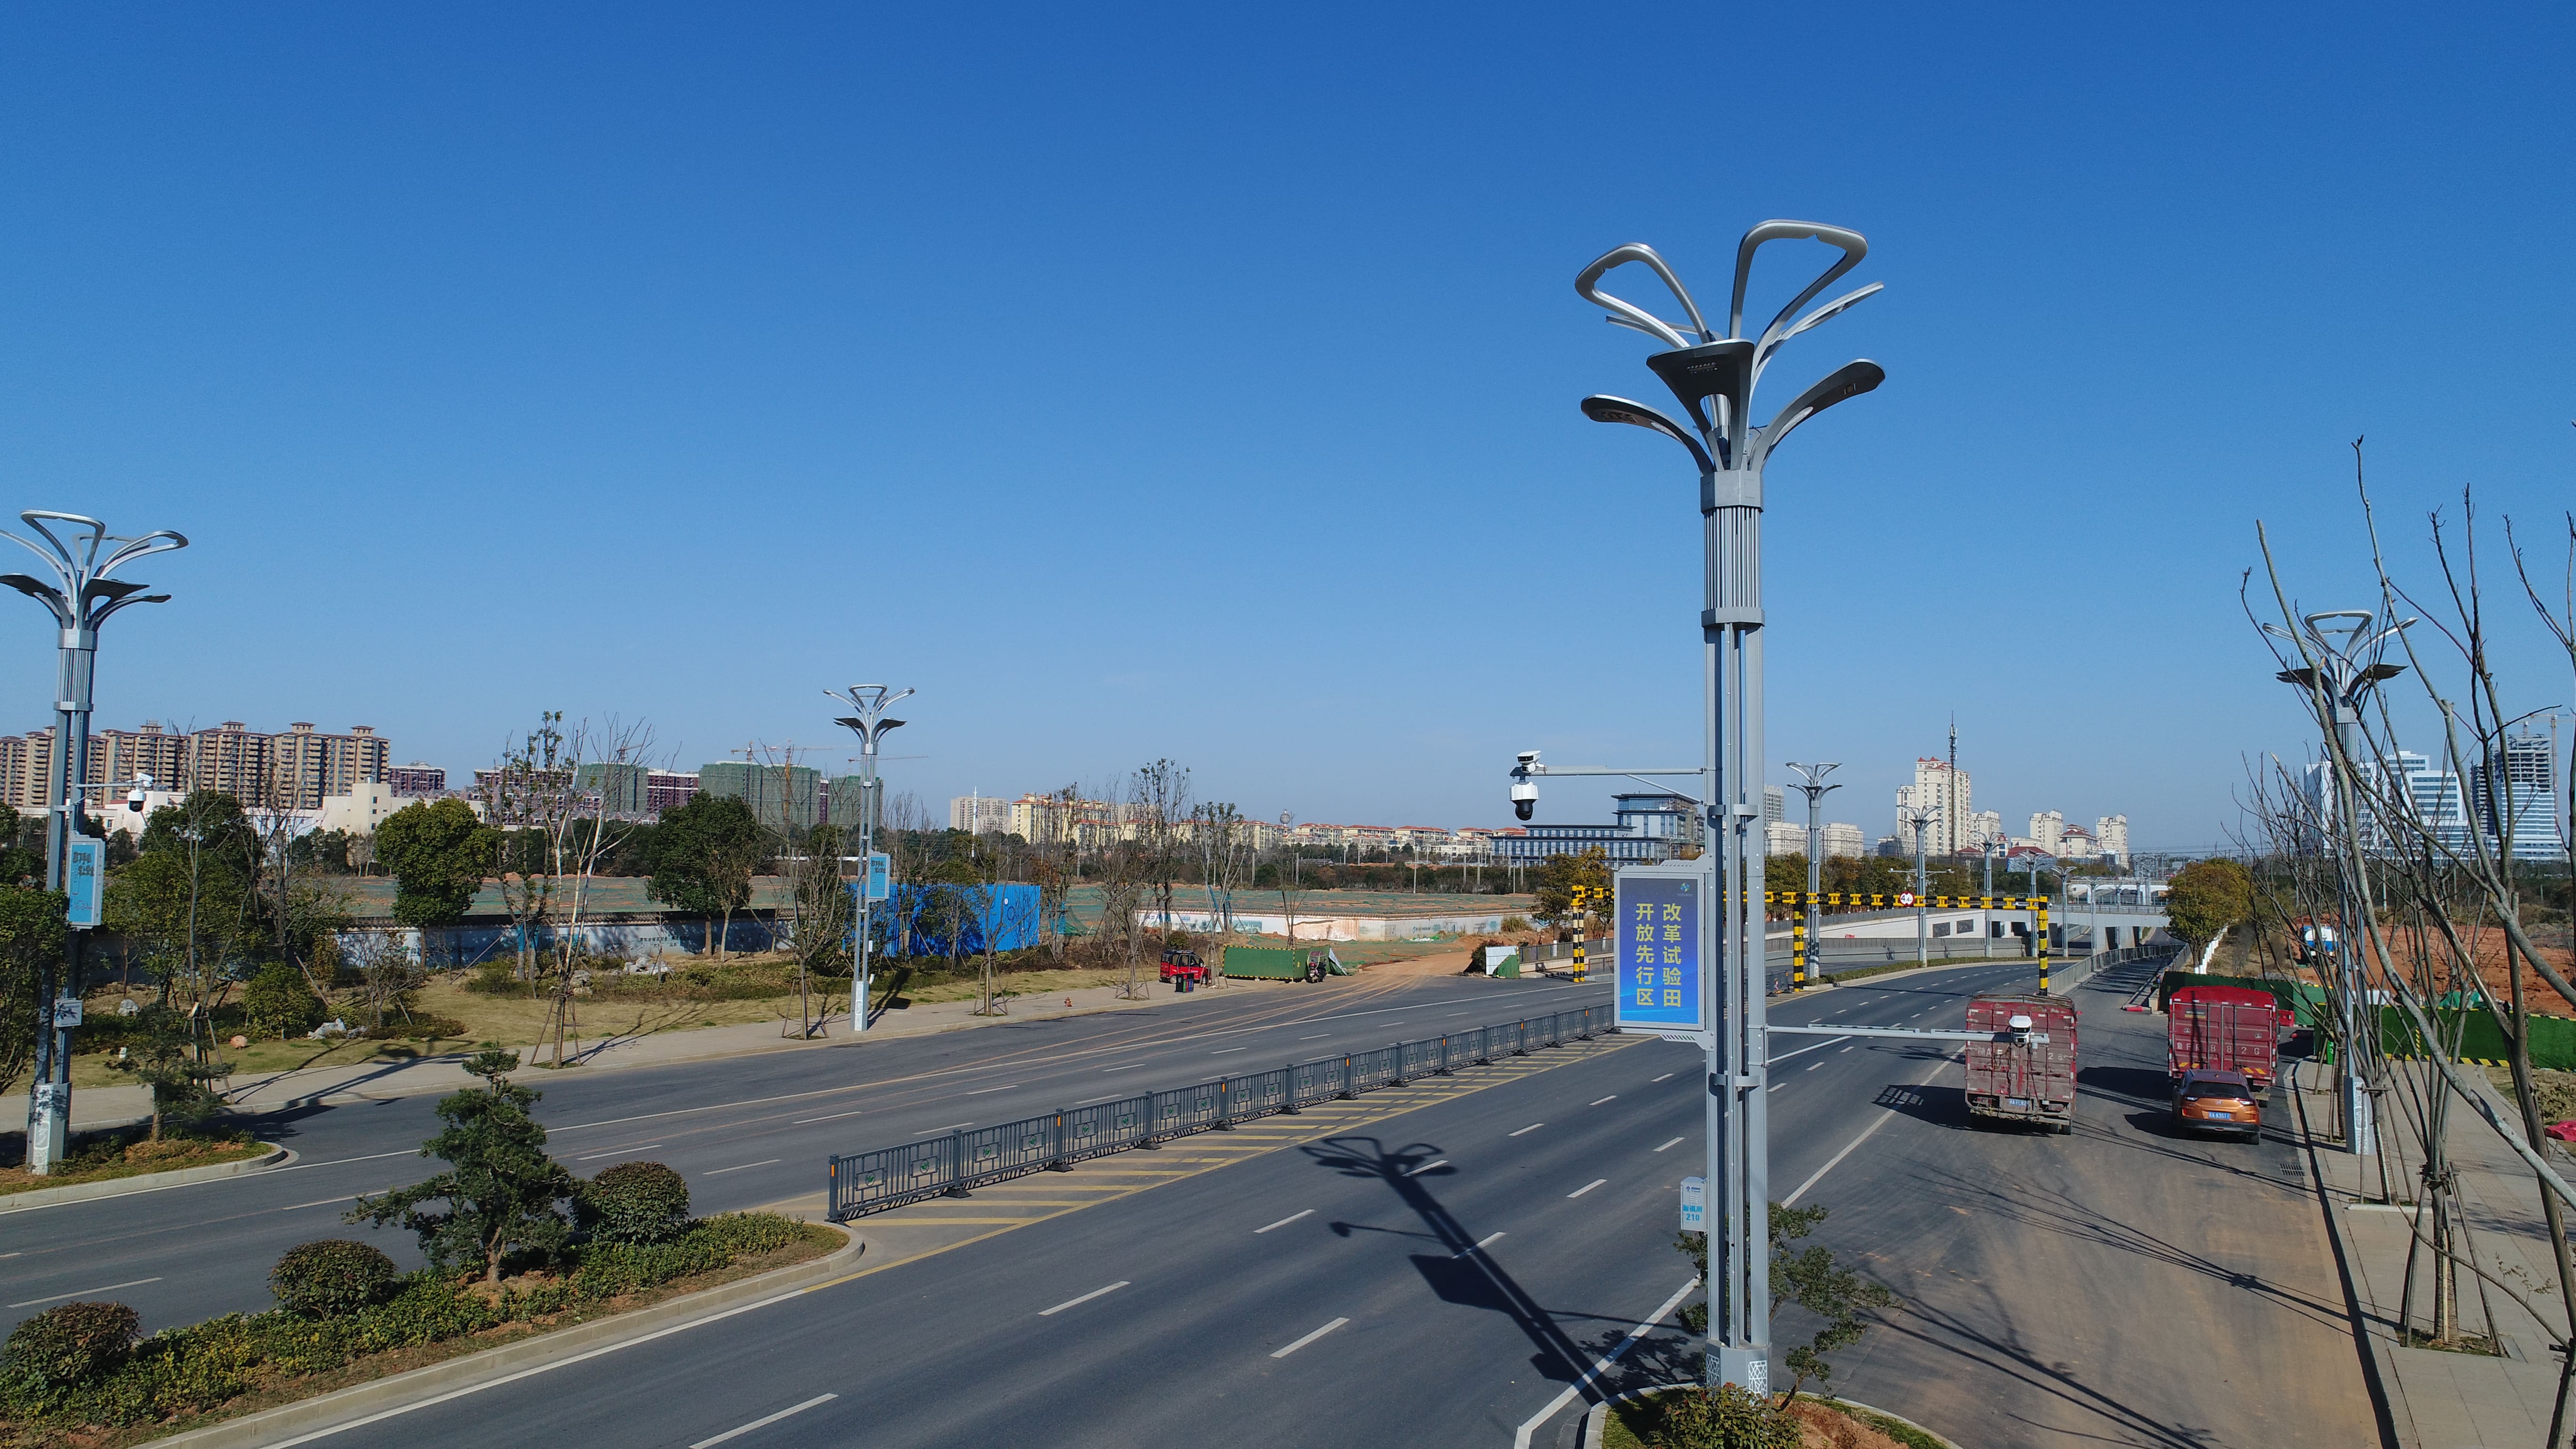 What is the history of the development of China Street Light?